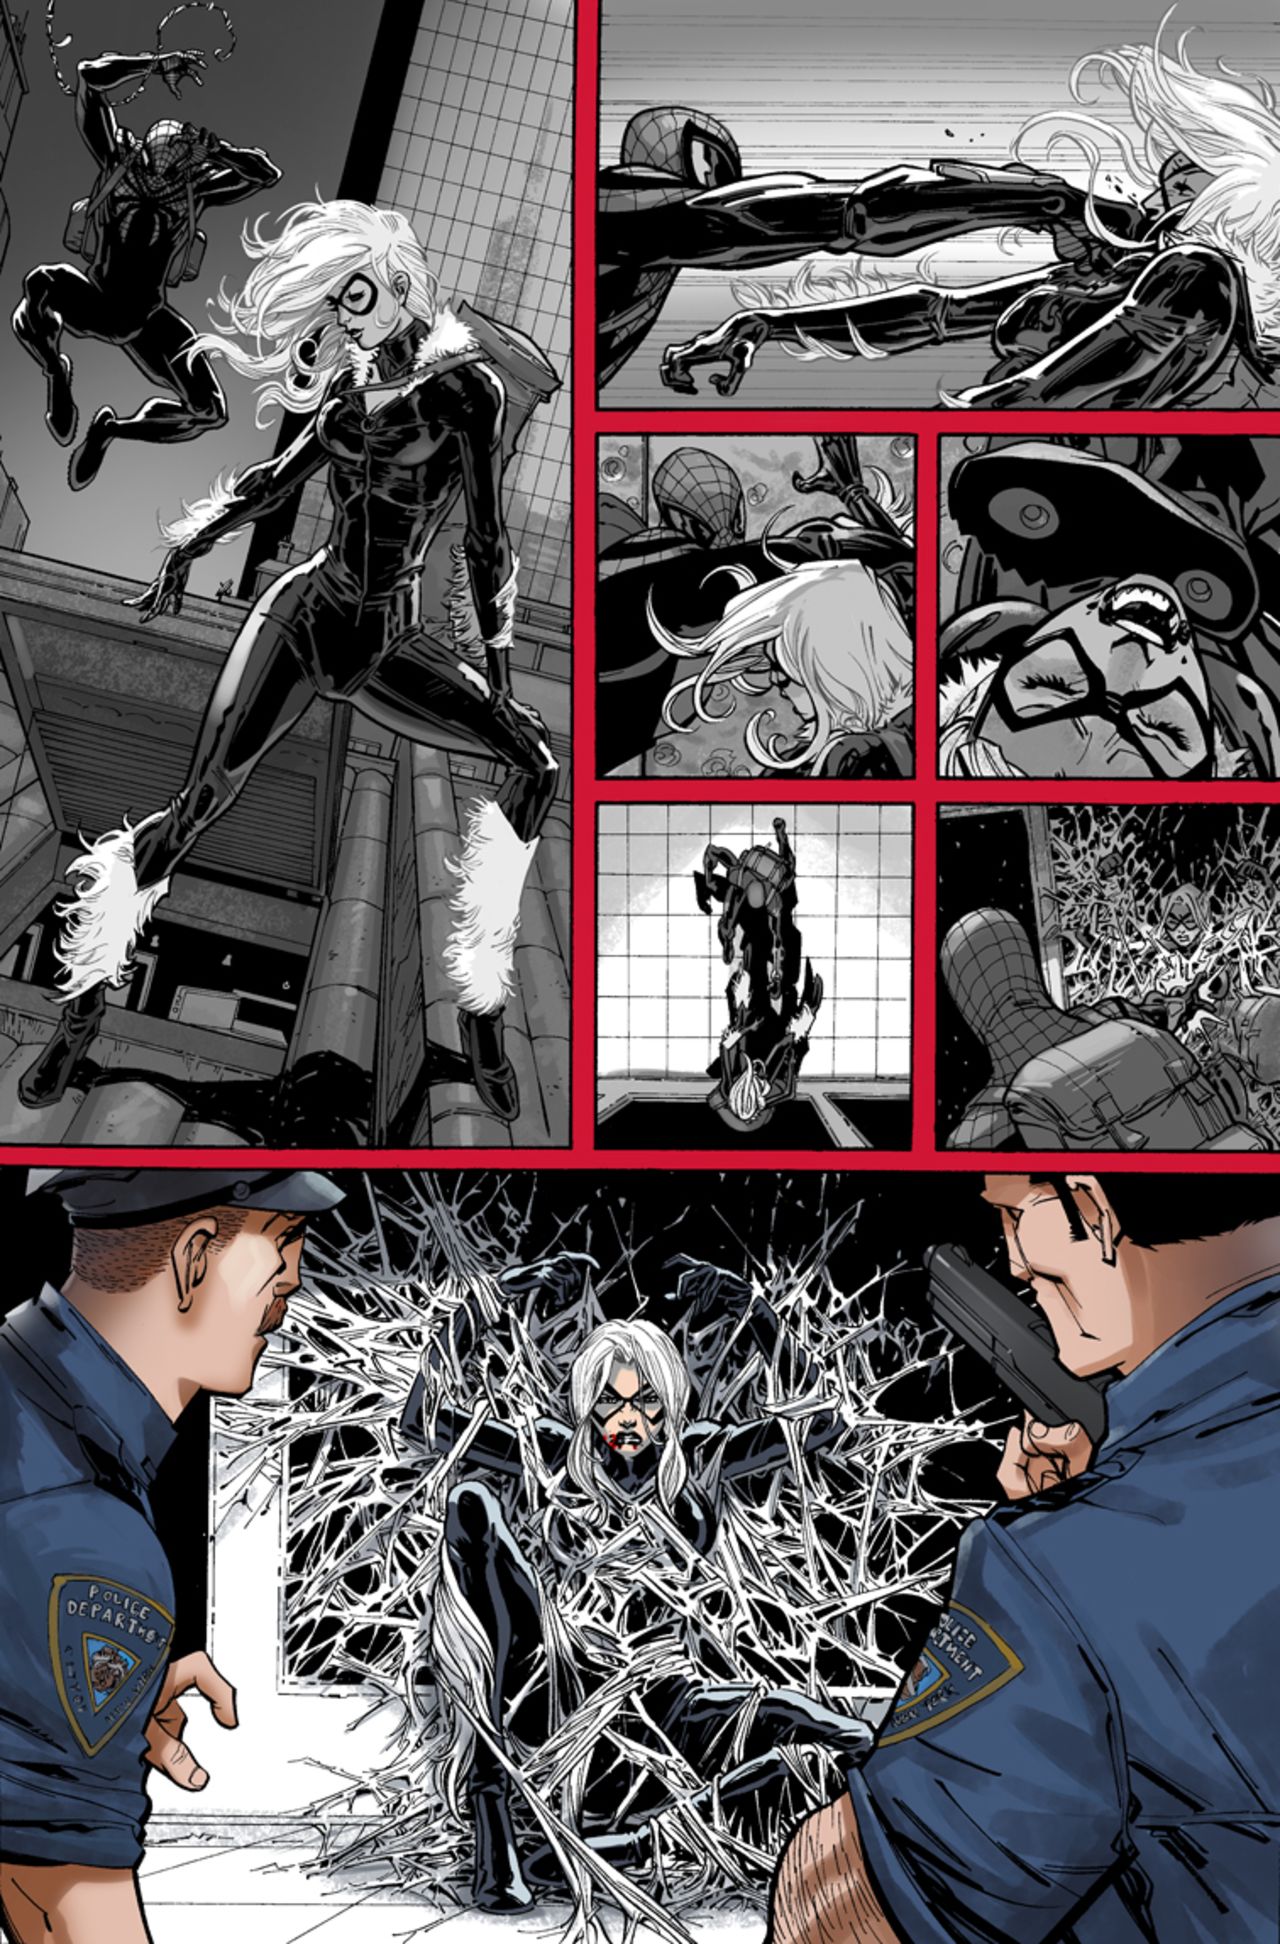 A look at more detail from "Amazing Spider-Man" #1.